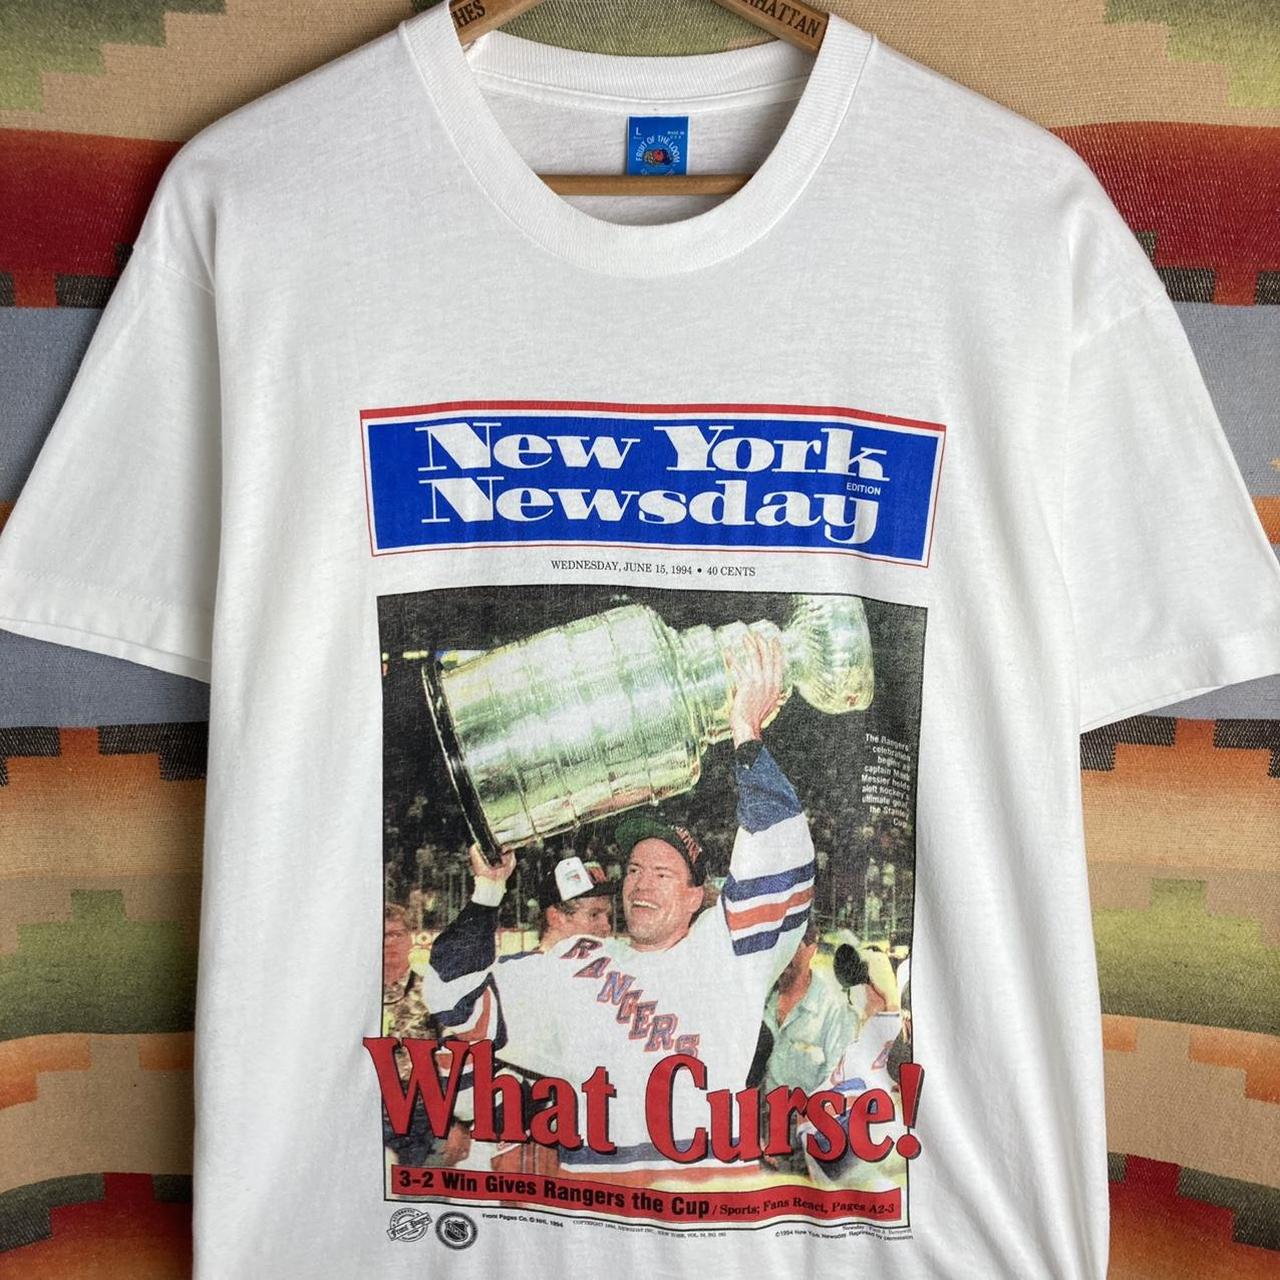 Vintage 90s New York Rangers 1994 NHL Stanley Cup T-shirt 